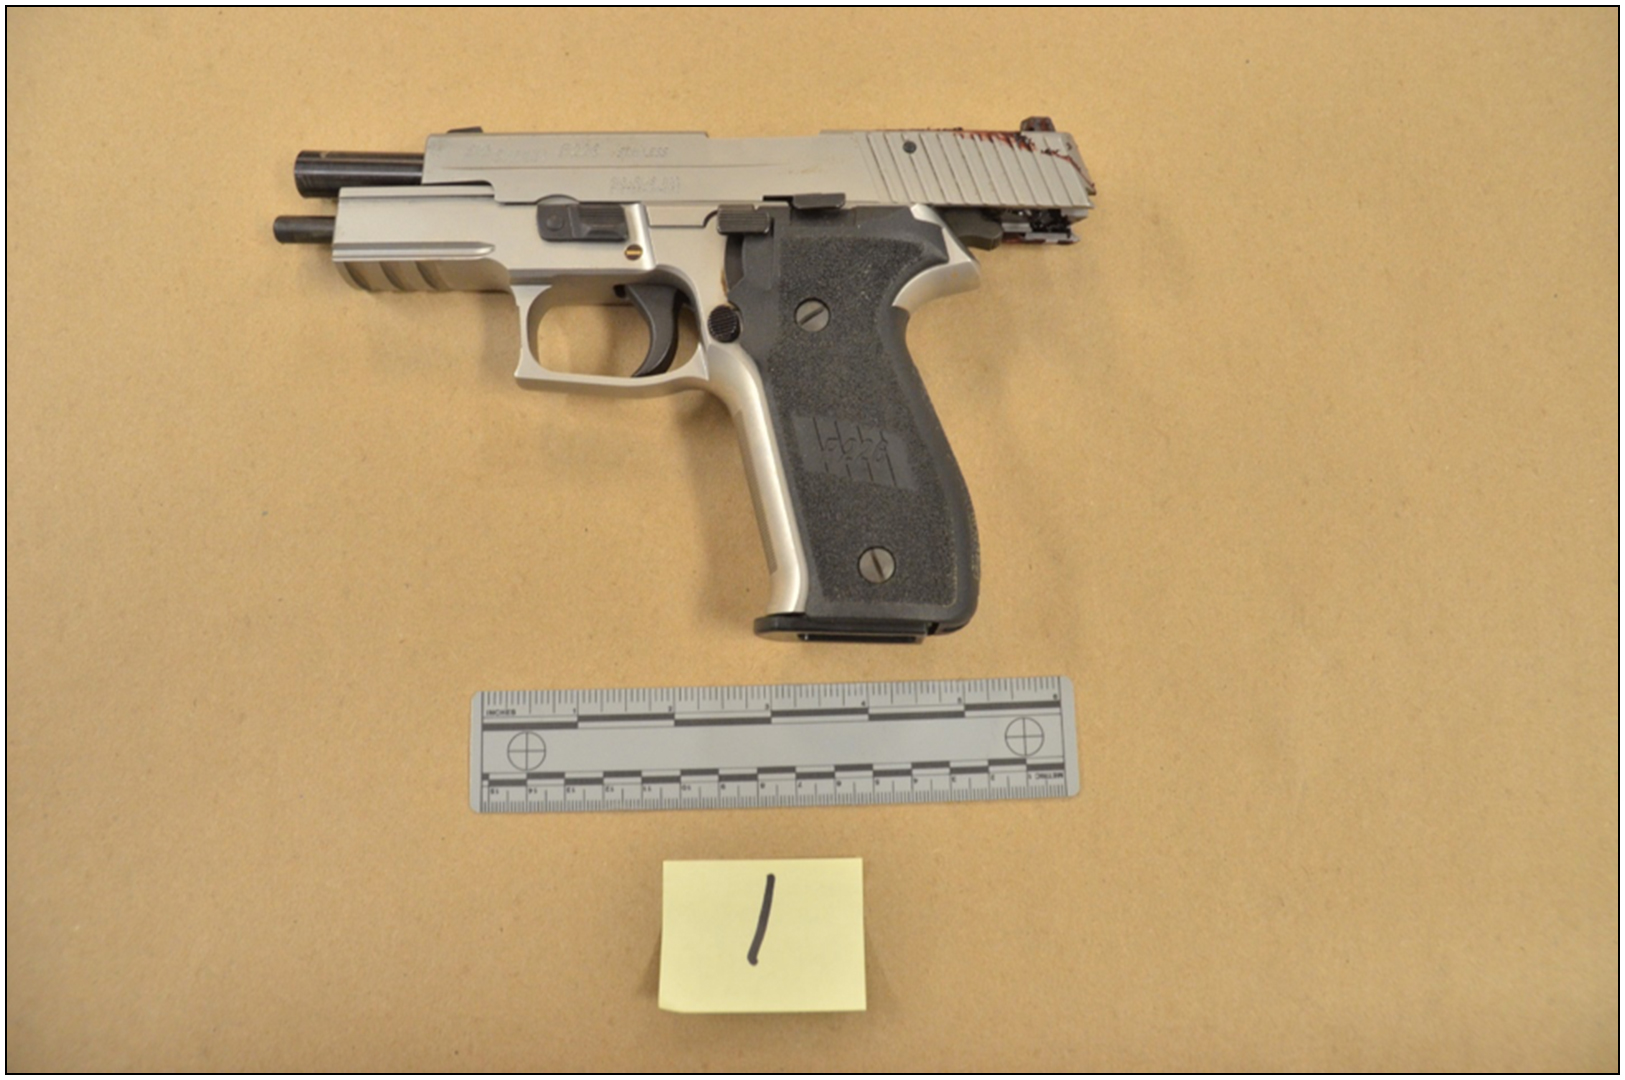 Photo of the gun from the scene